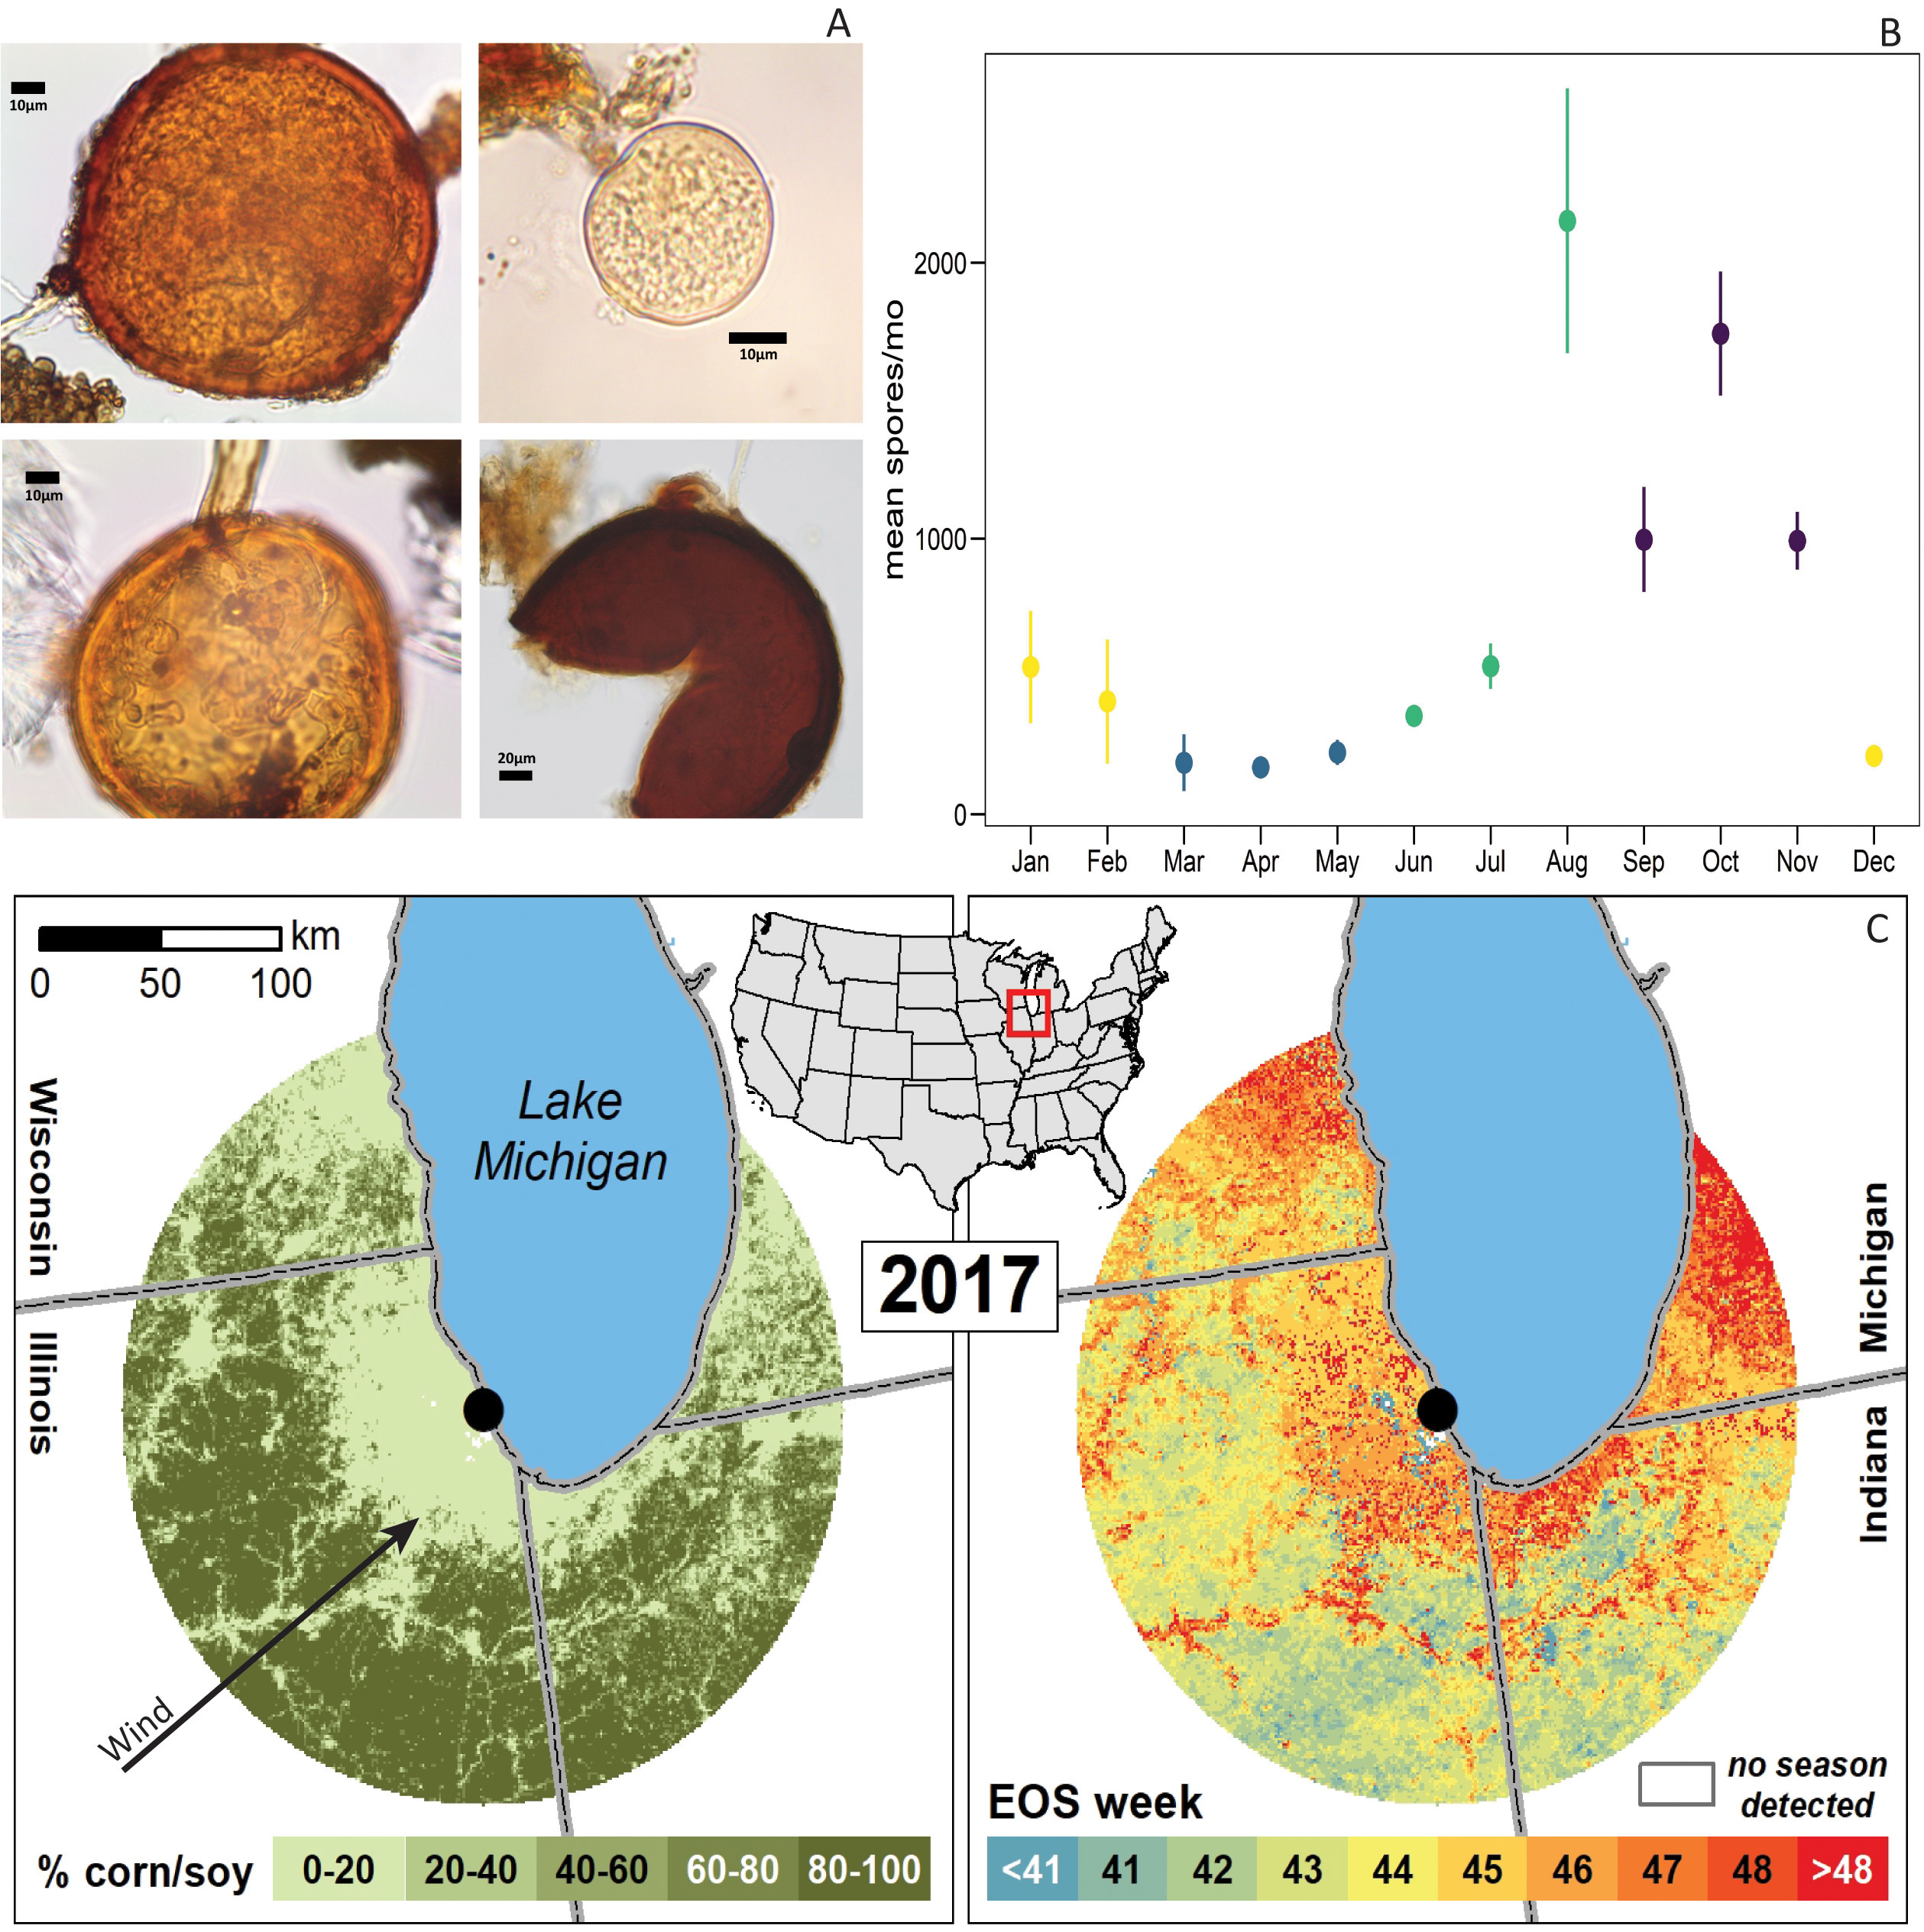 Microbes, charts and maps of dispersal of mycorrhizal fungi 